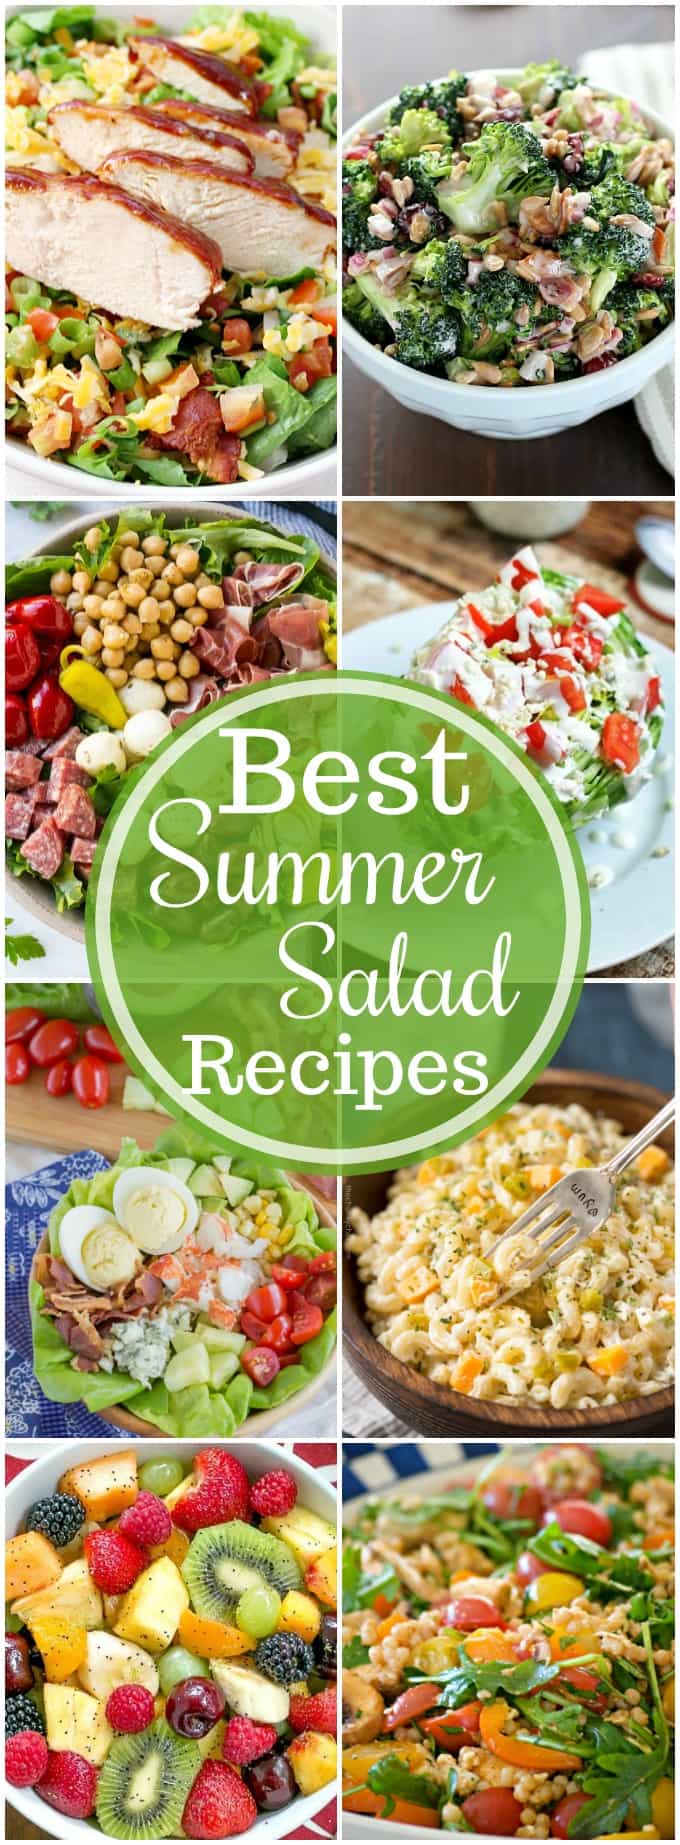 Summer salad recipes are essential when it comes to potlucks and bbs! You'll find a salad here that everyone will love!